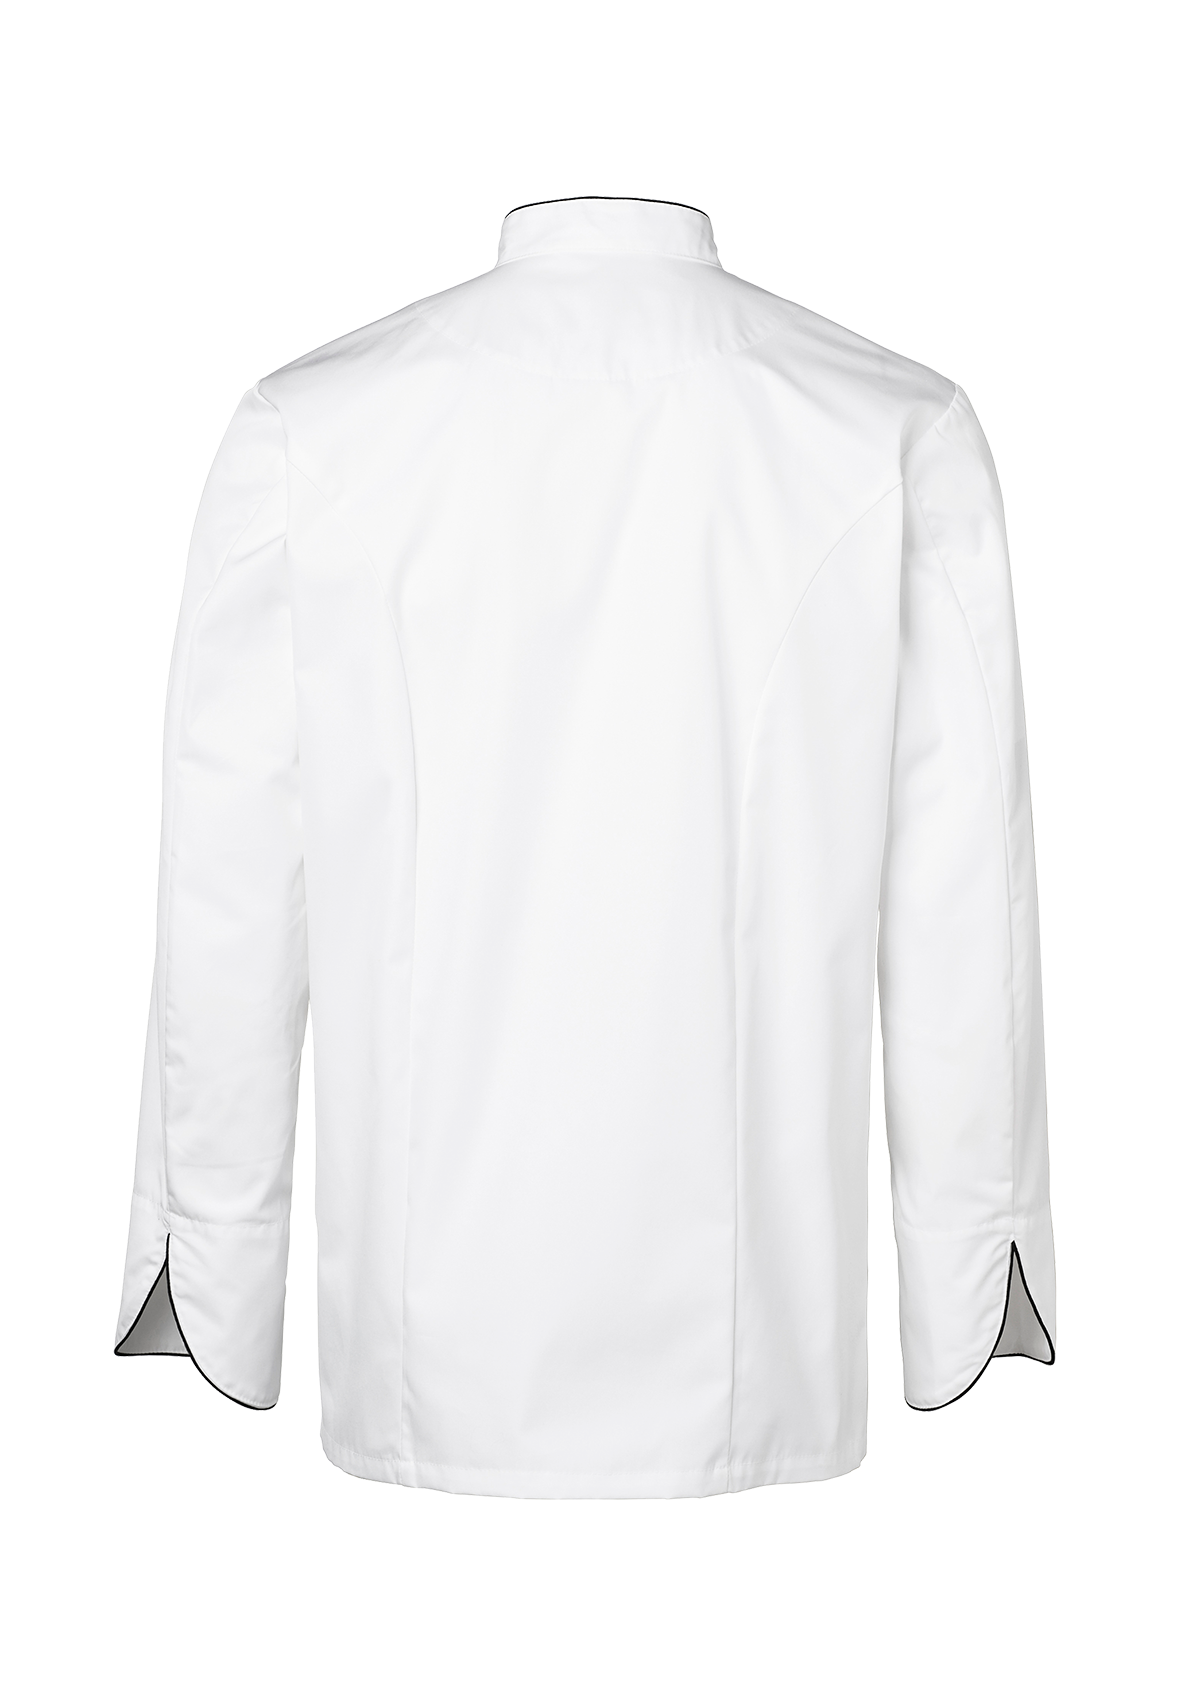 Men's Chef Jacket exclusive with long sleeves. Segers | Cookniche